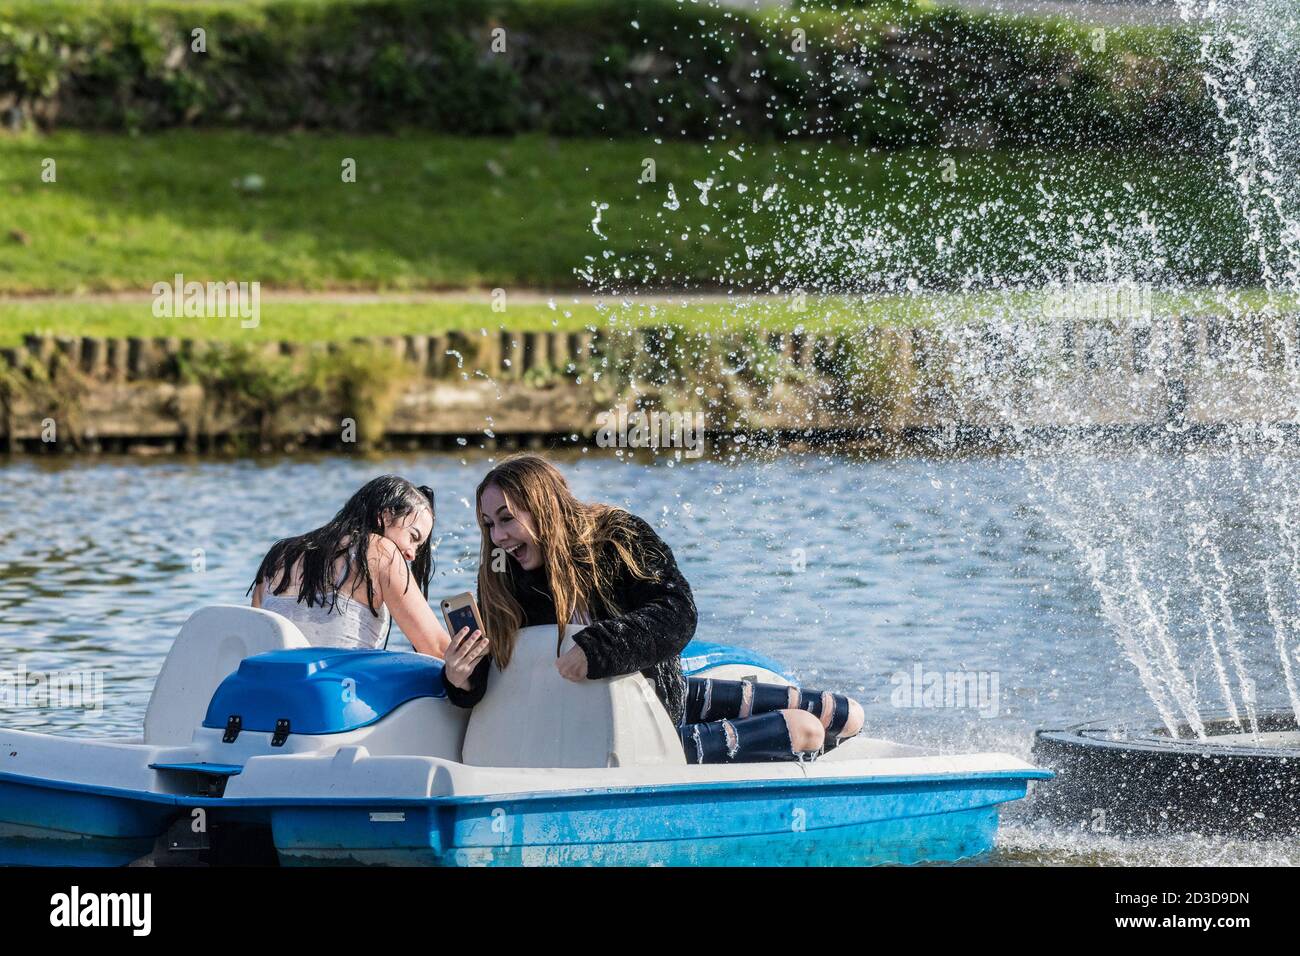 An excited teenage girl taking a selfie in a pedalo as she and her friend is getting soaked by the spray of an ornamental fountain on Trenance Boating Stock Photo